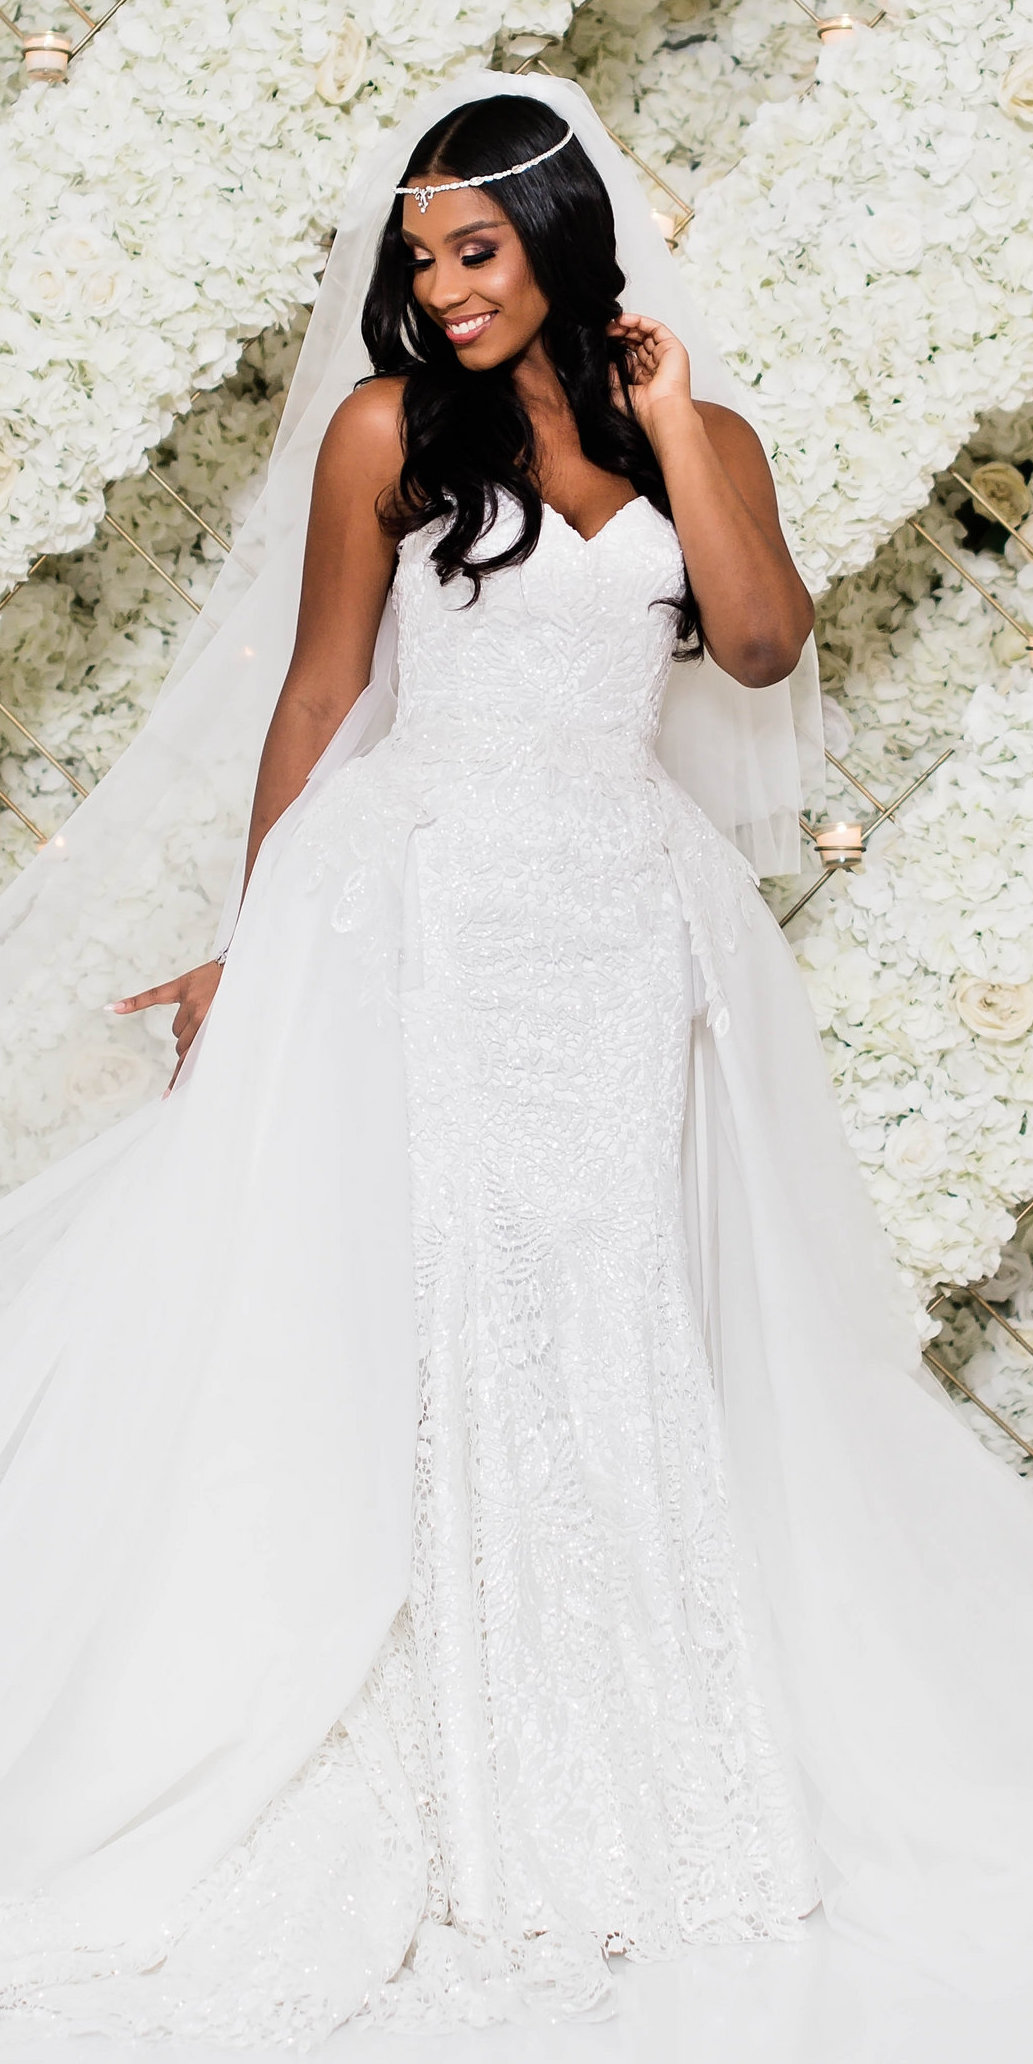 African American bride with a lace strapless wedding dress with overskirt - Photography: Pharris Photos